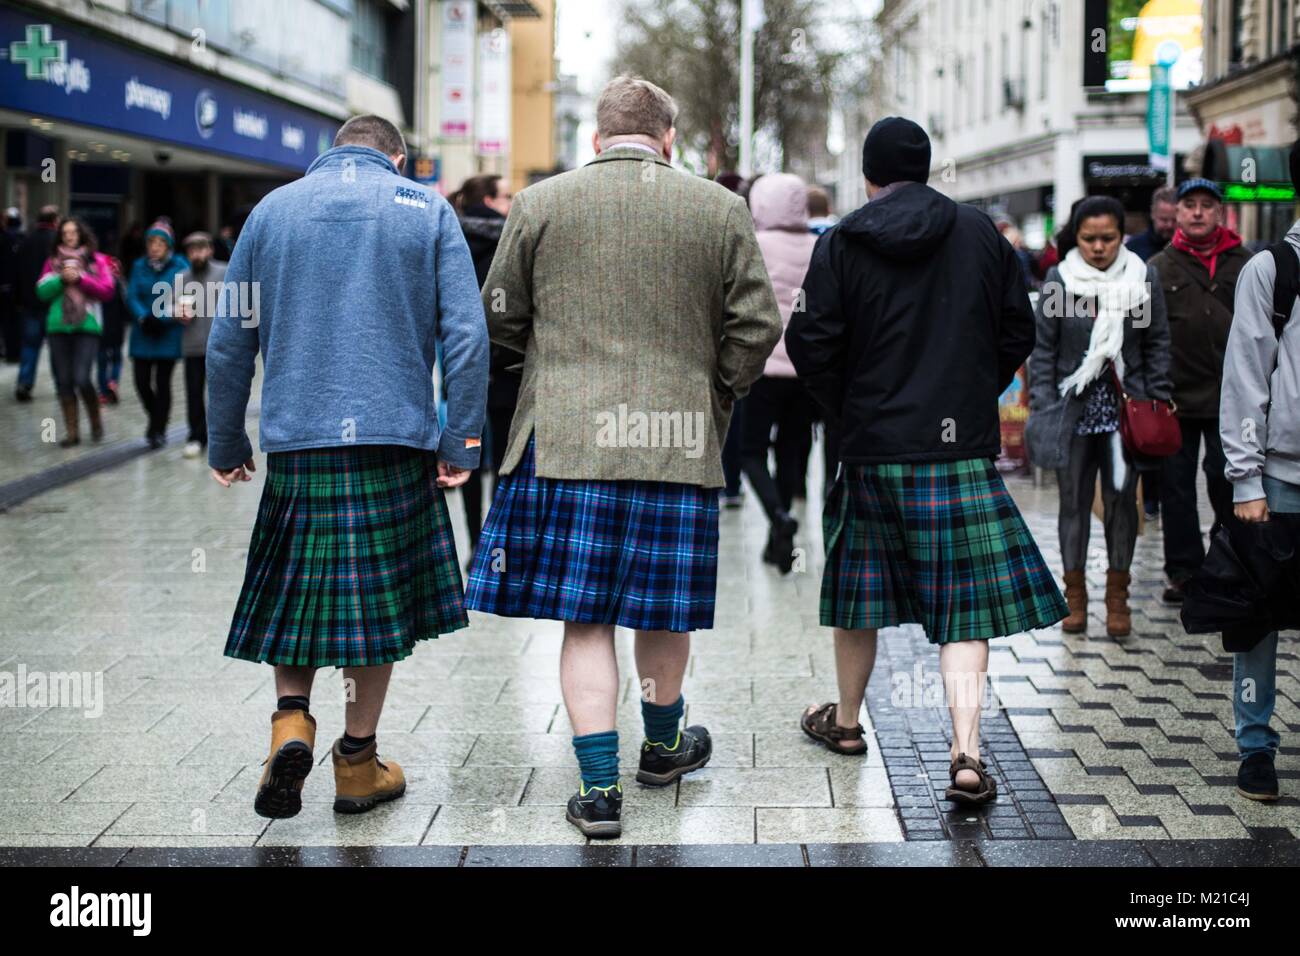 UNITED KINGDOM, WALES. 03 February 2018. Scottish fans make their way to the Stadium in the rain. Credit: Lorna Cabble/Alamy Live News Stock Photo